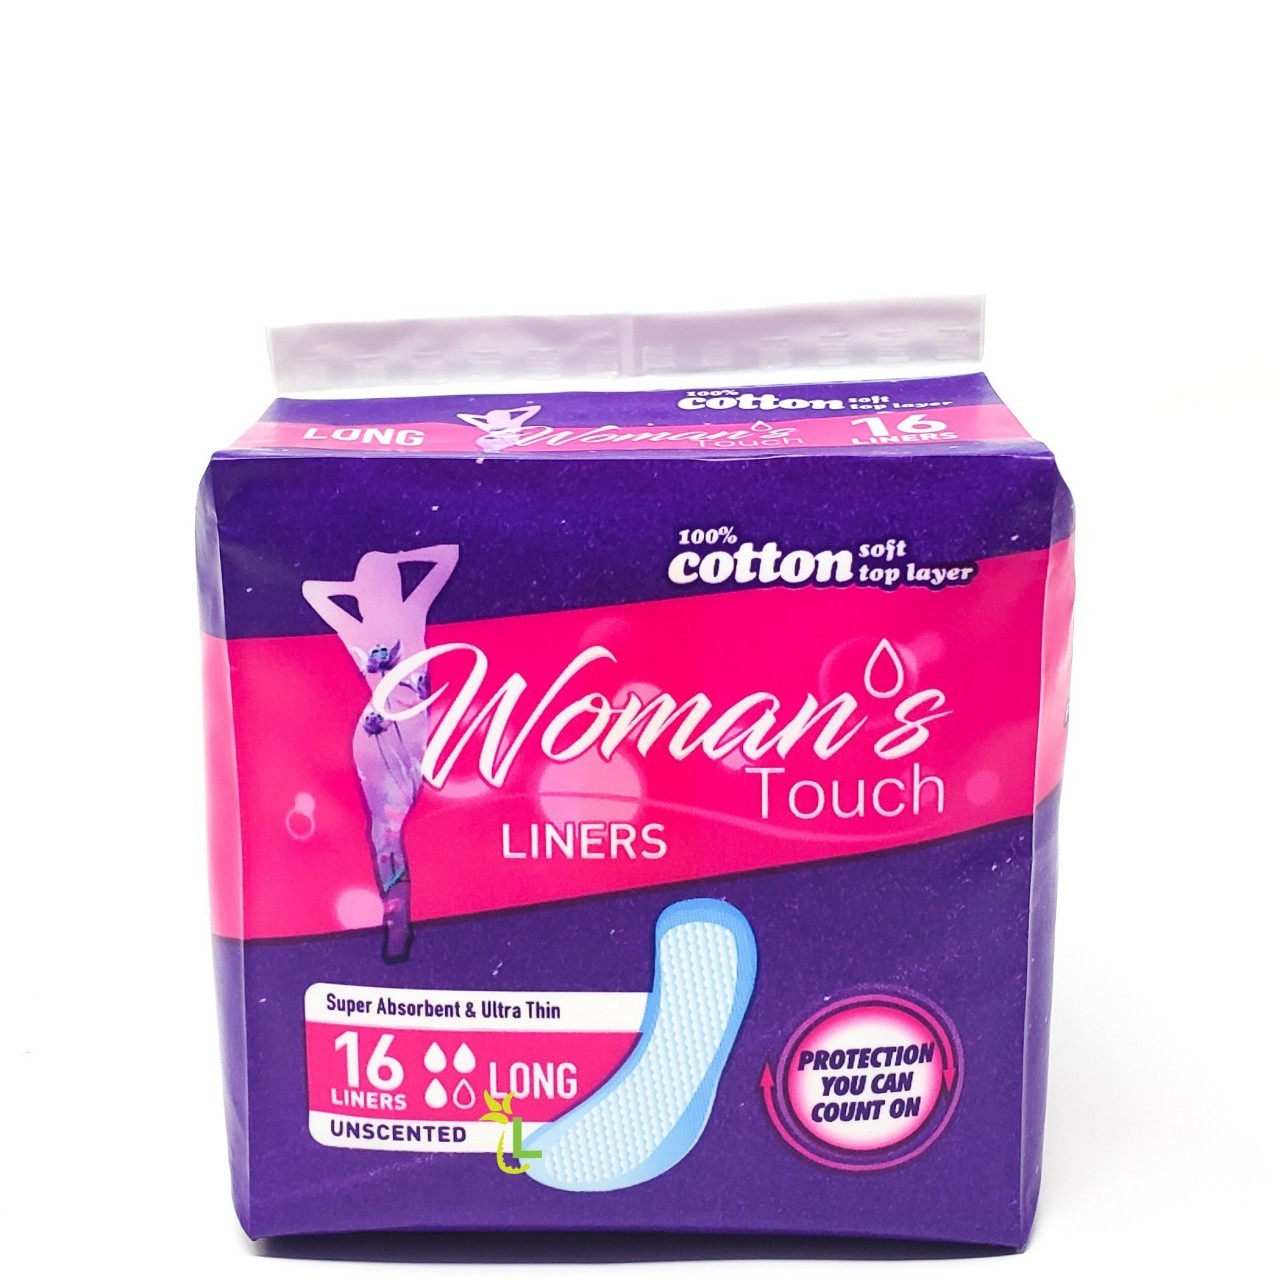 WOMANS TOUCH PANTY LINERS 16s